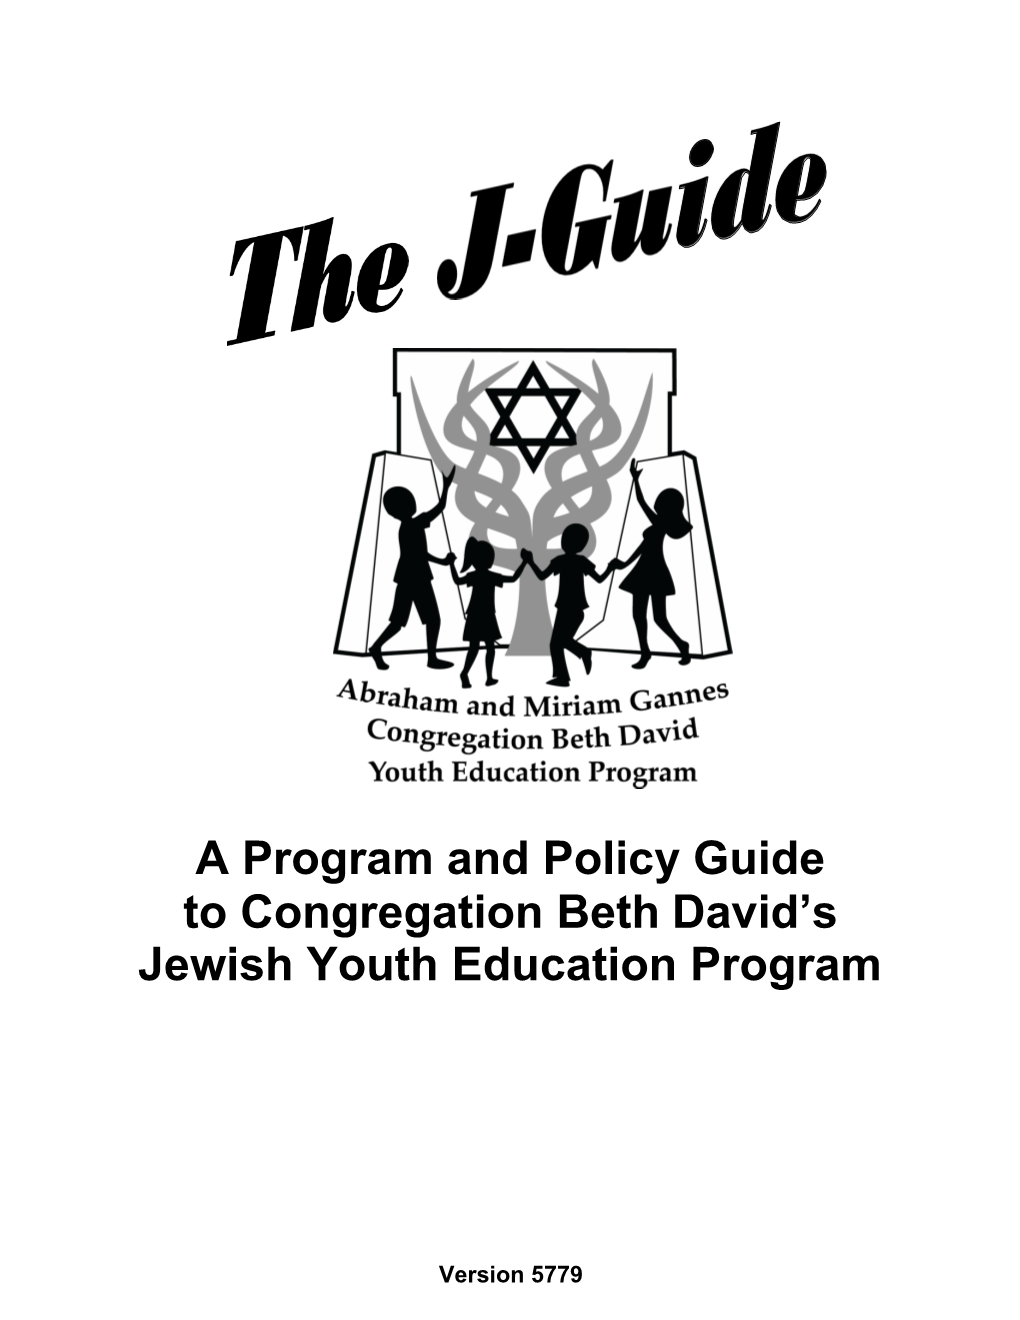 A Program and Policy Guide to Congregation Beth David's Jewish Youth Education Program